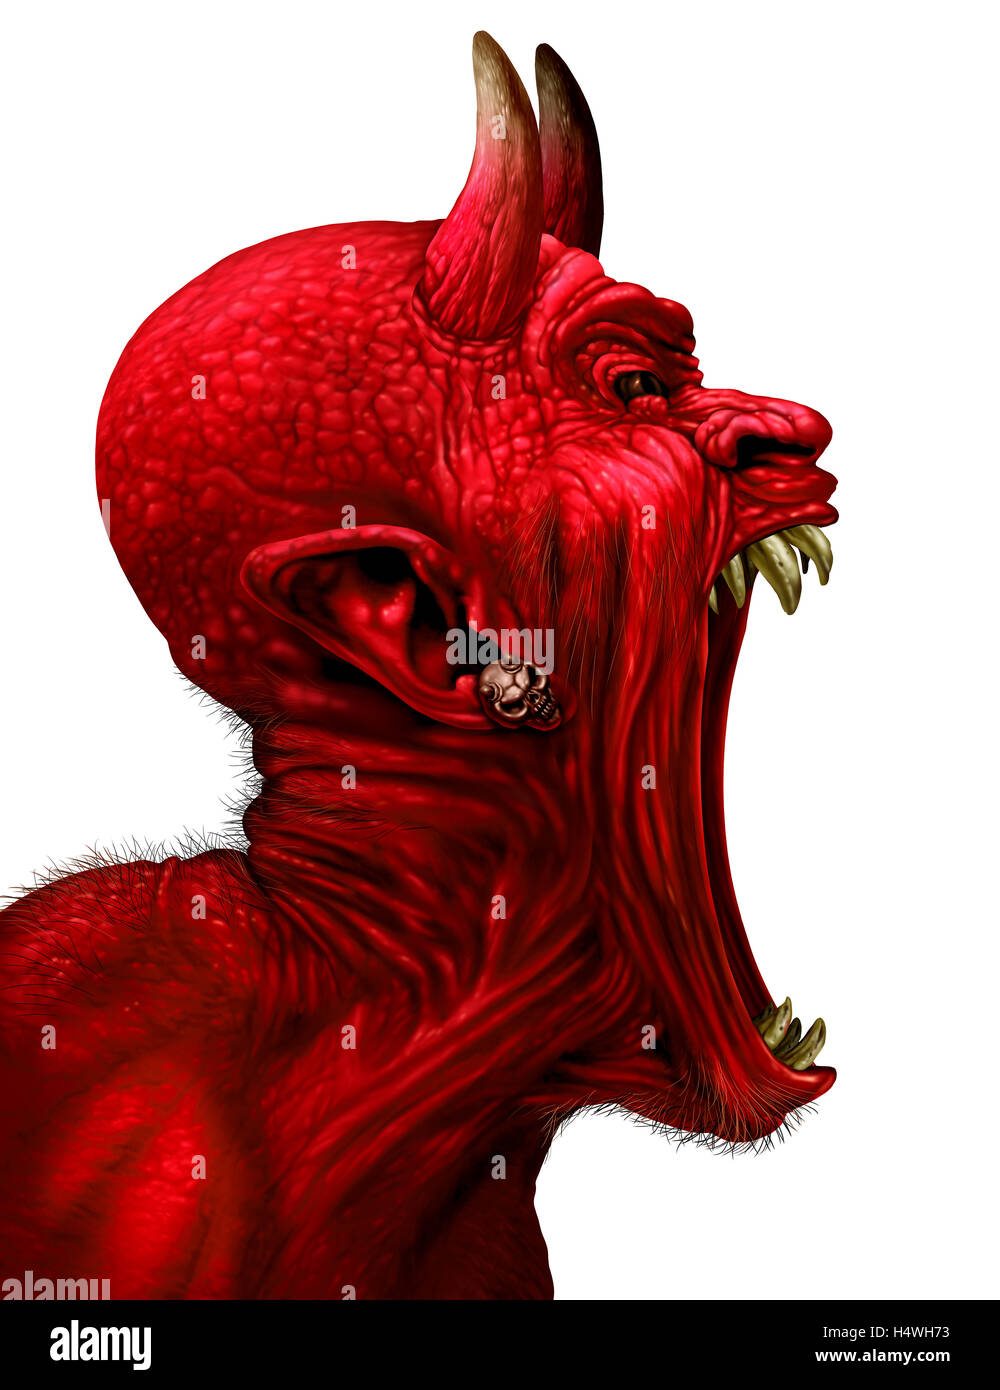 Devil scream character as a red demon or monster sreaming with fangs and teeth with in an open mouth as a side view horror face Stock Photo